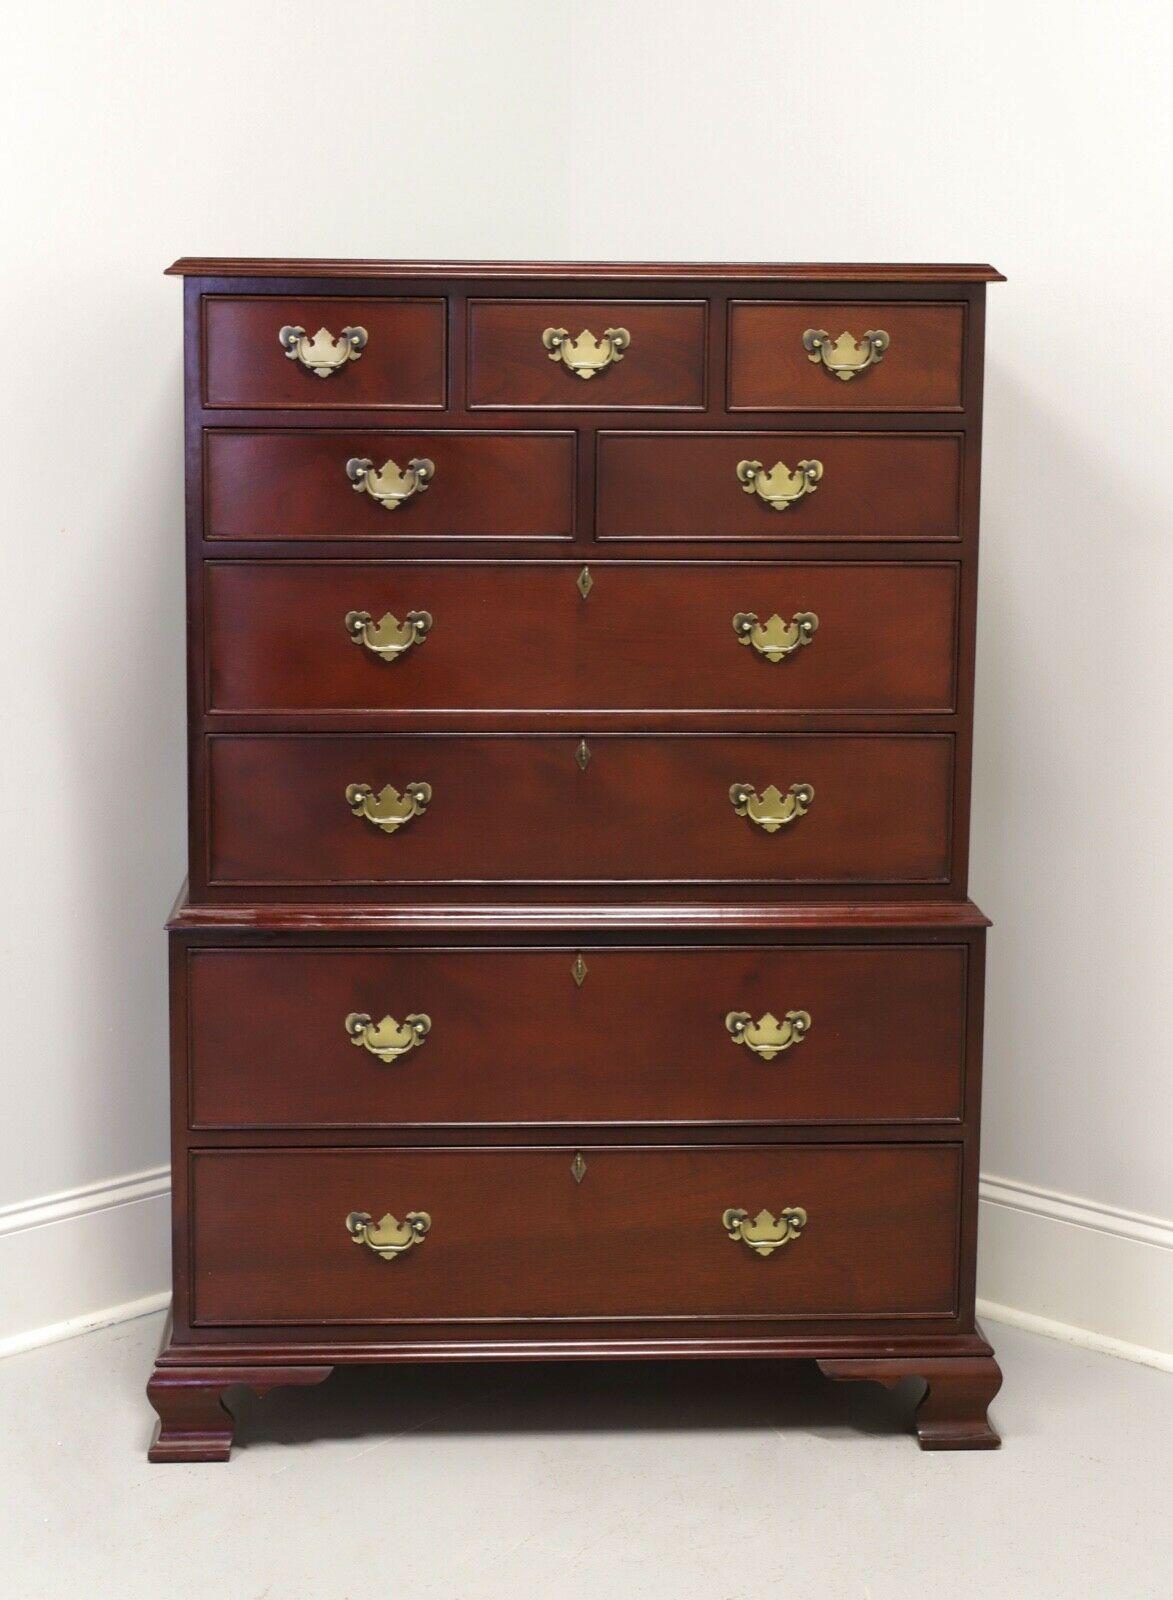 A Chippendale style chest on chest by Craftique, of Mebane, North Carolina, USA. Solid Mahogany with brass drawer pulls, escutcheons and ogee bracket feet. Features nine various size drawers of dovetail construction, four larger being lockable.